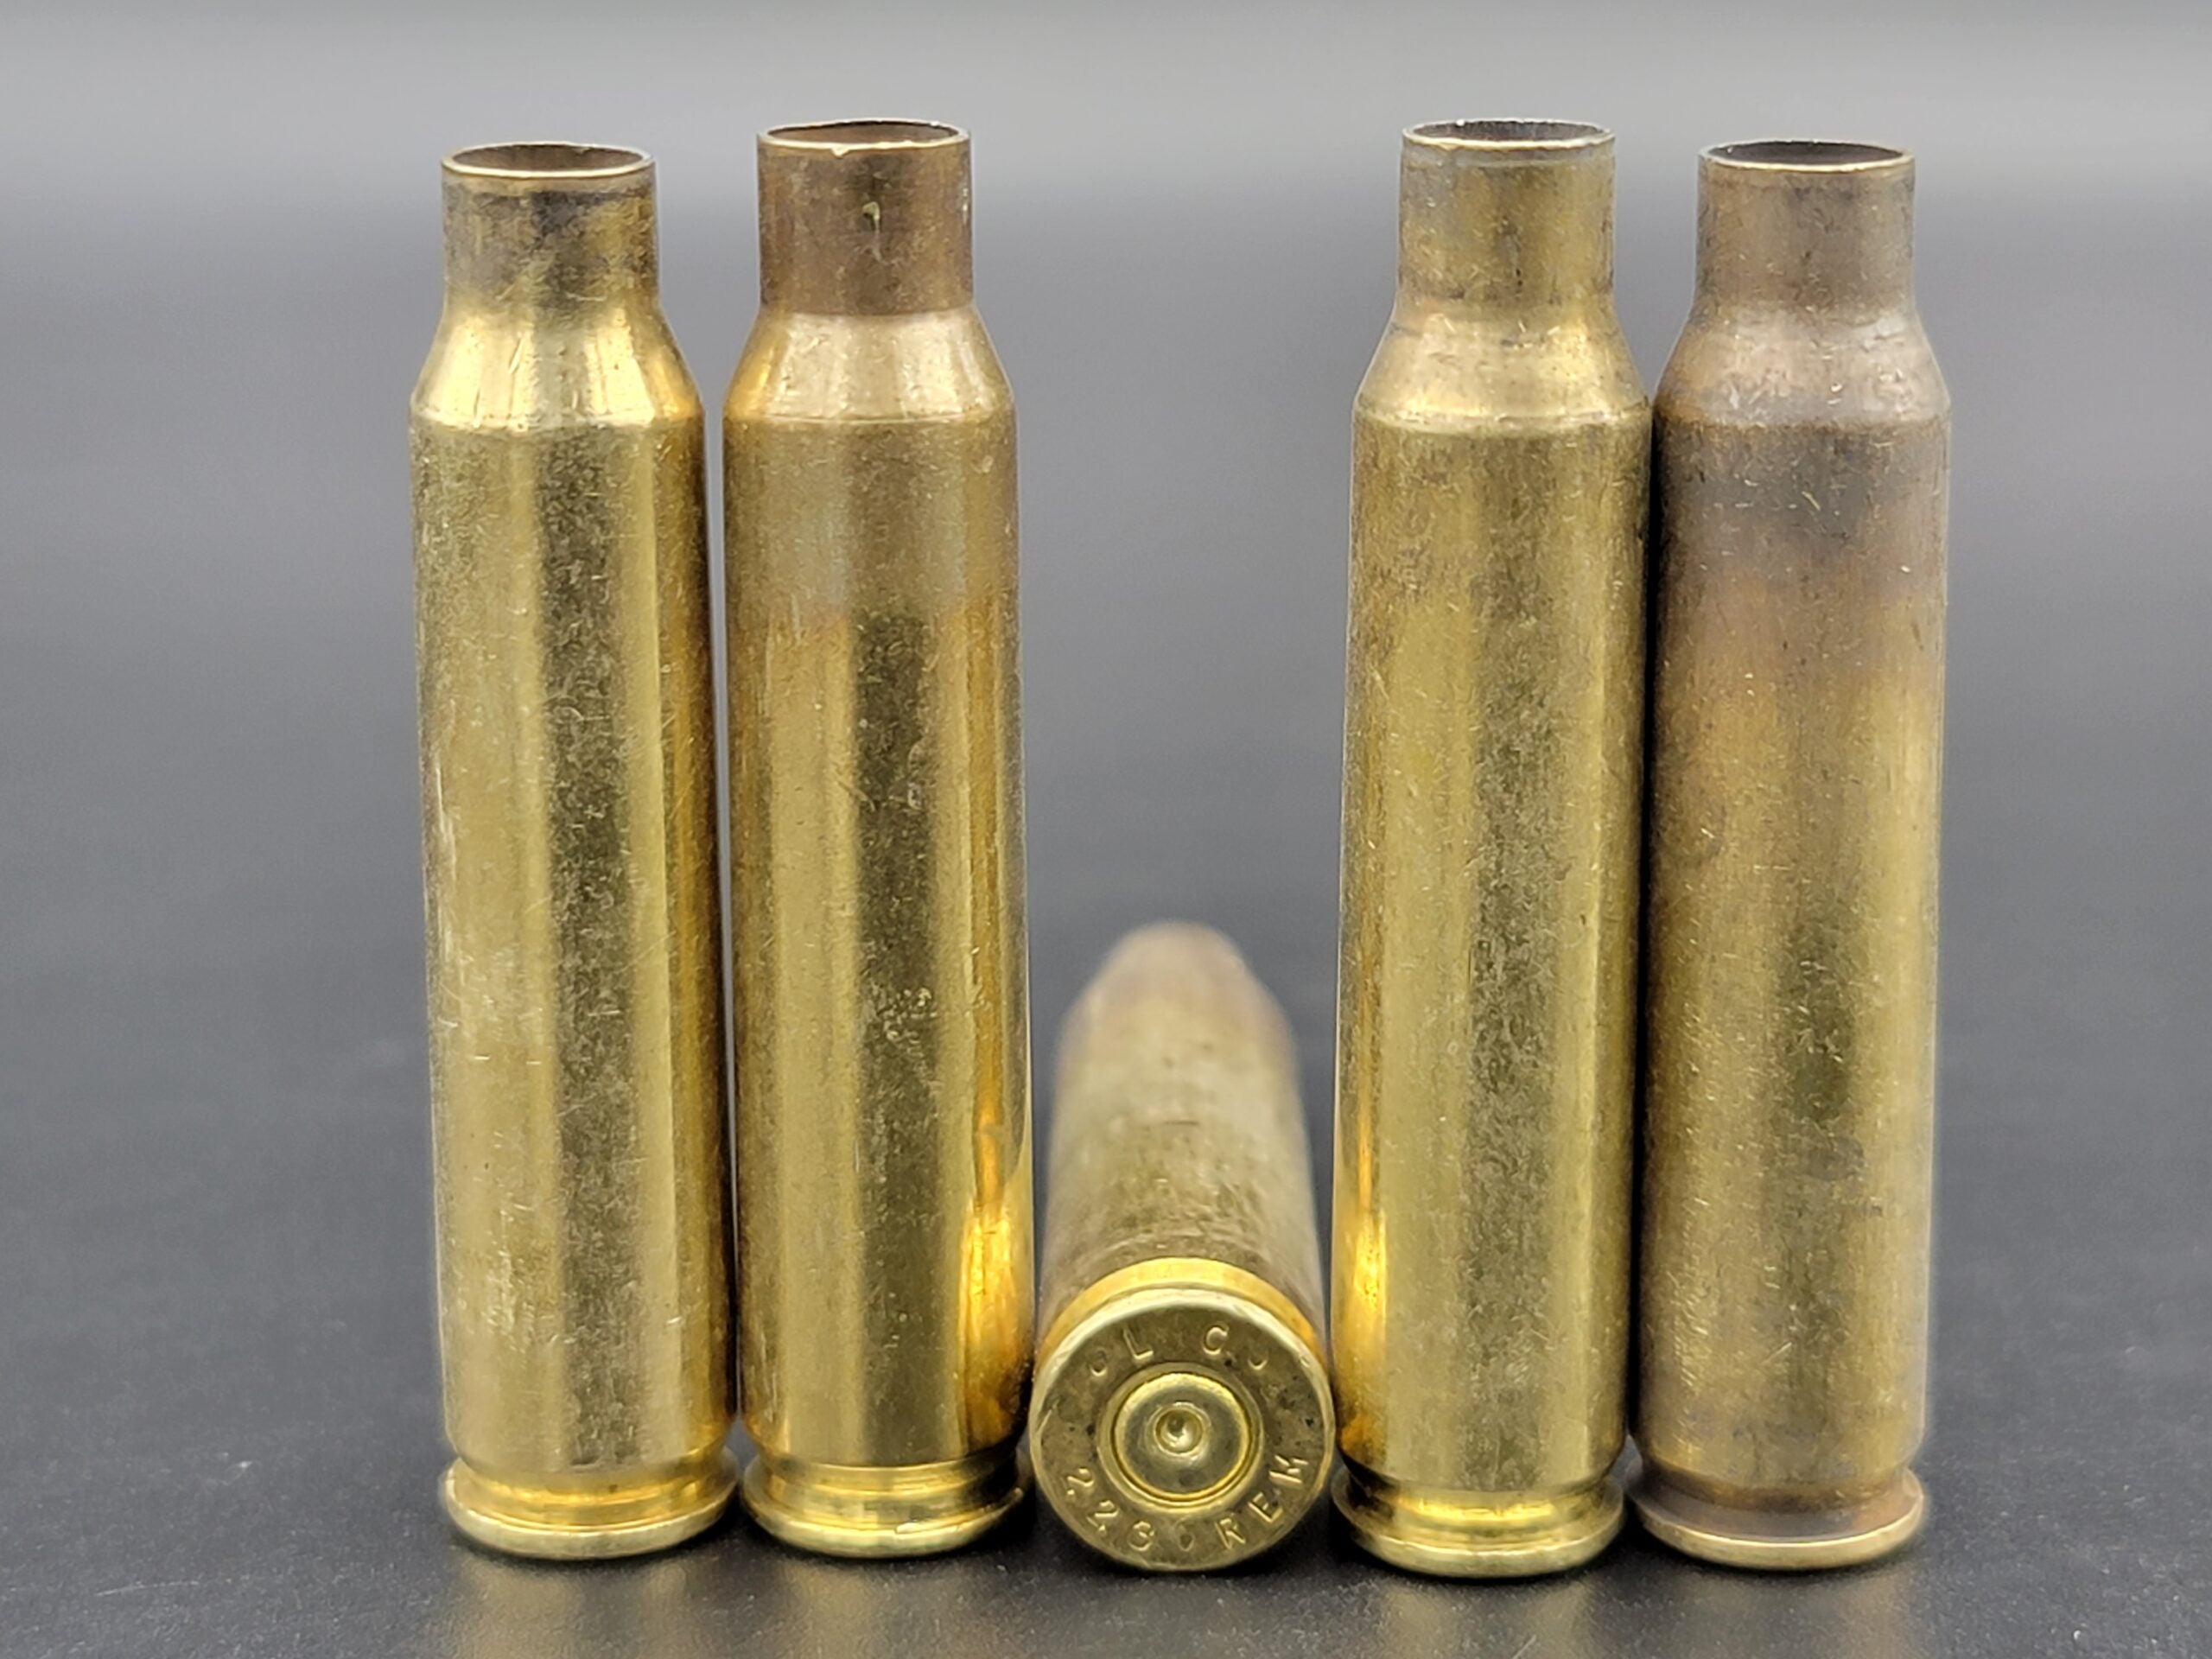 SOLD/EXPIRED - 223/5.56 Brass & Bullets